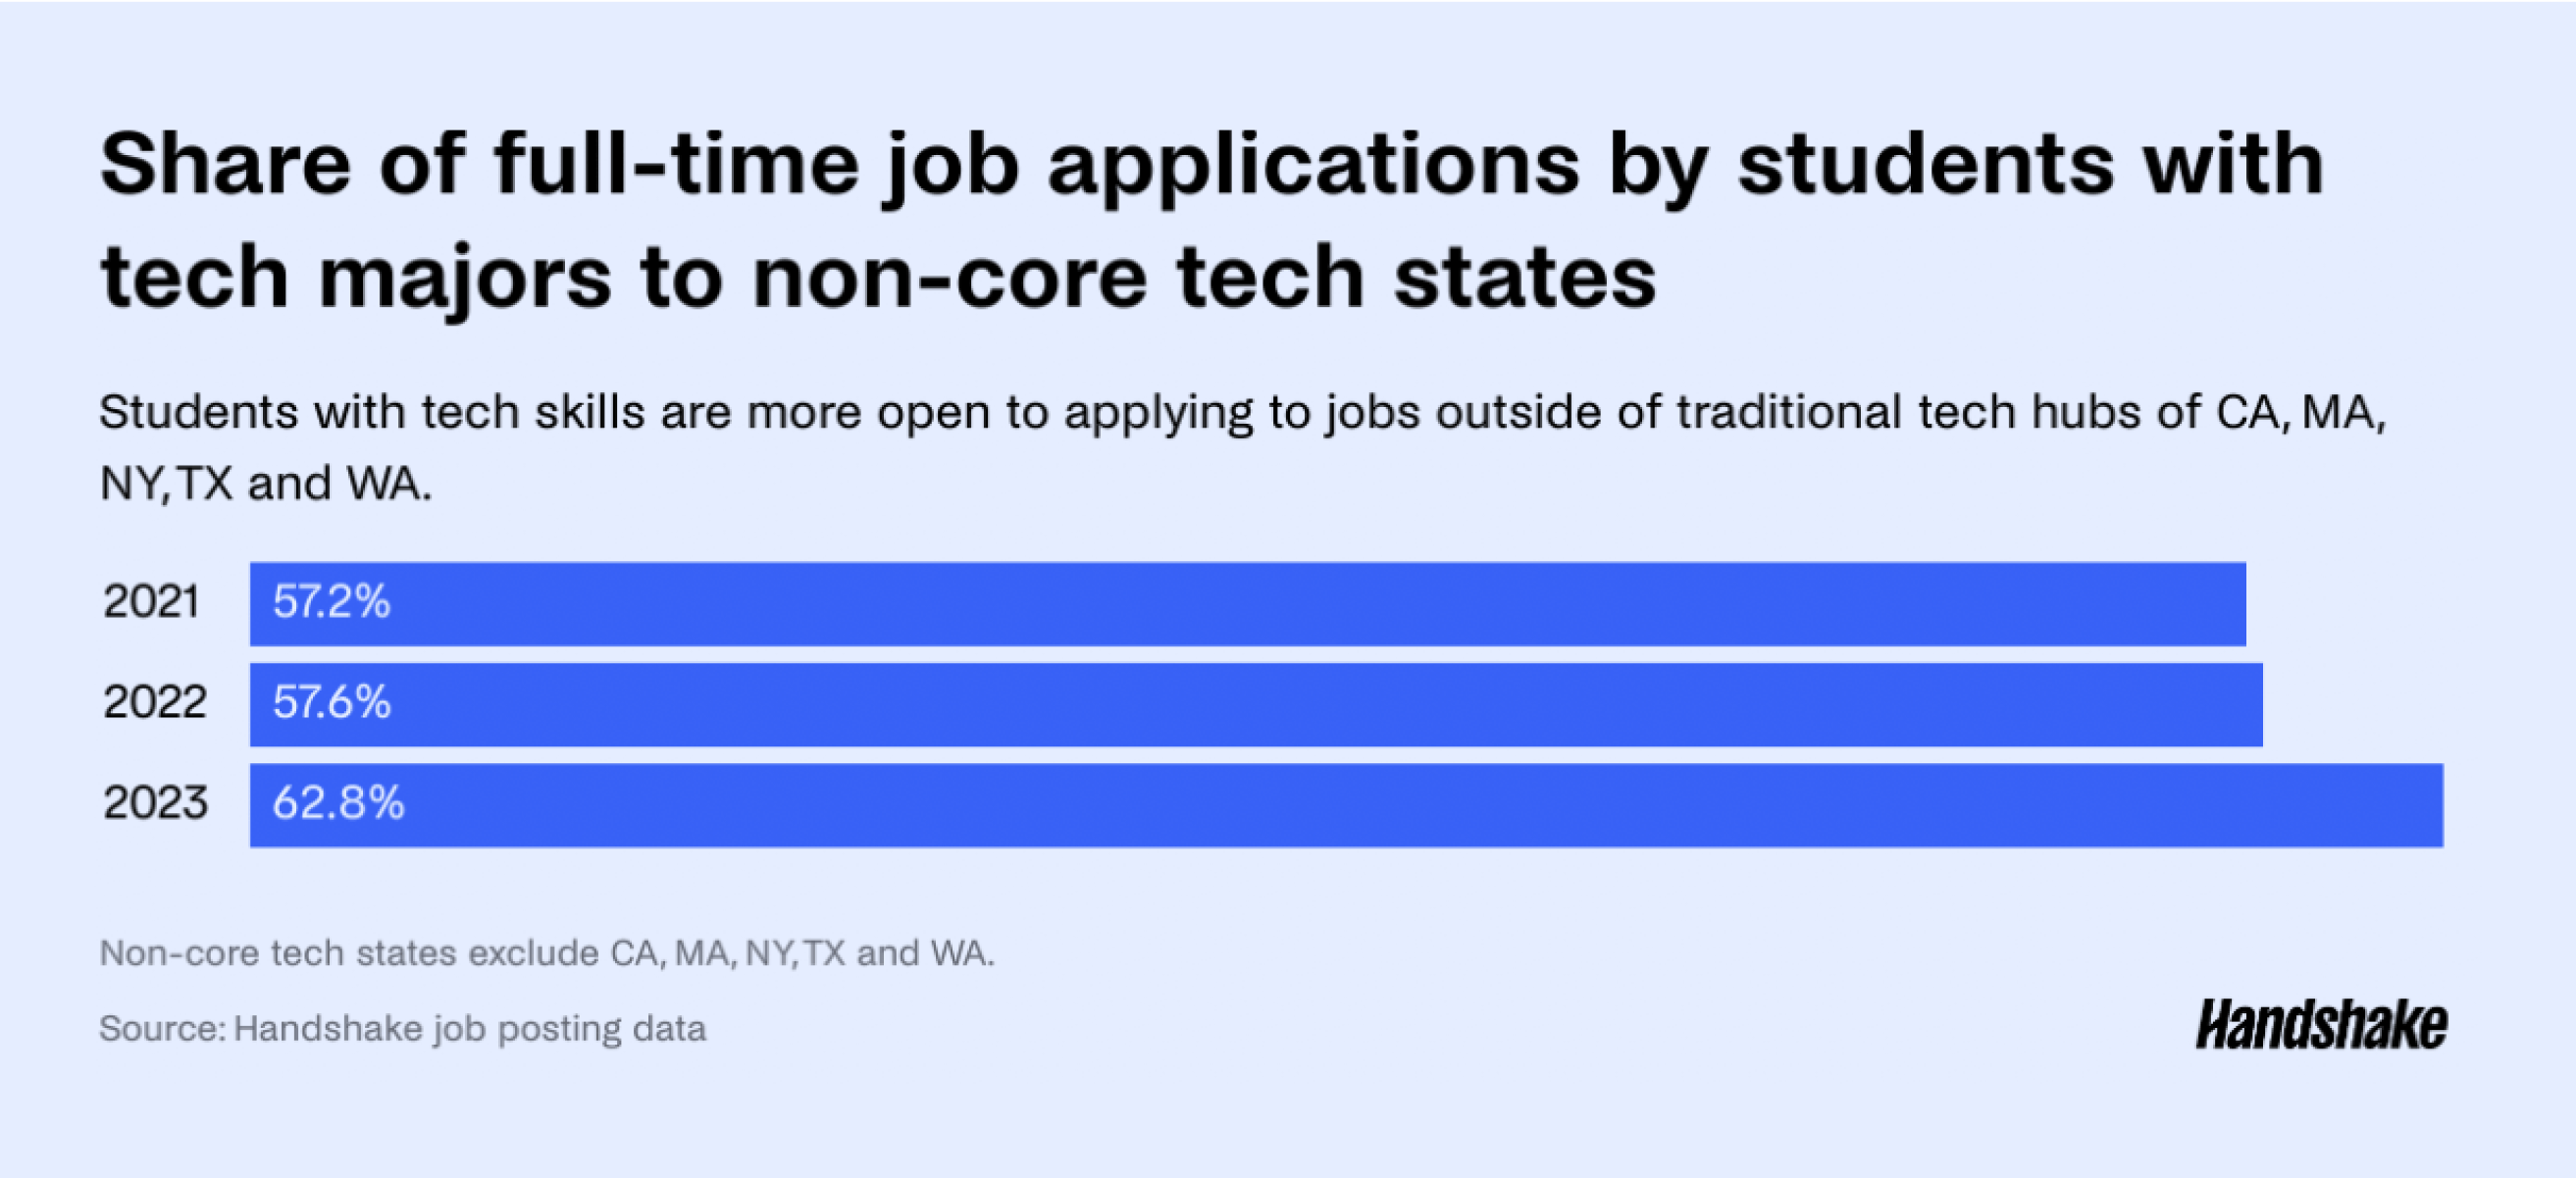 students with tech skills are more open to applying to jobs outside of traditionsl tech hubs of CA, MA, NY, and WA